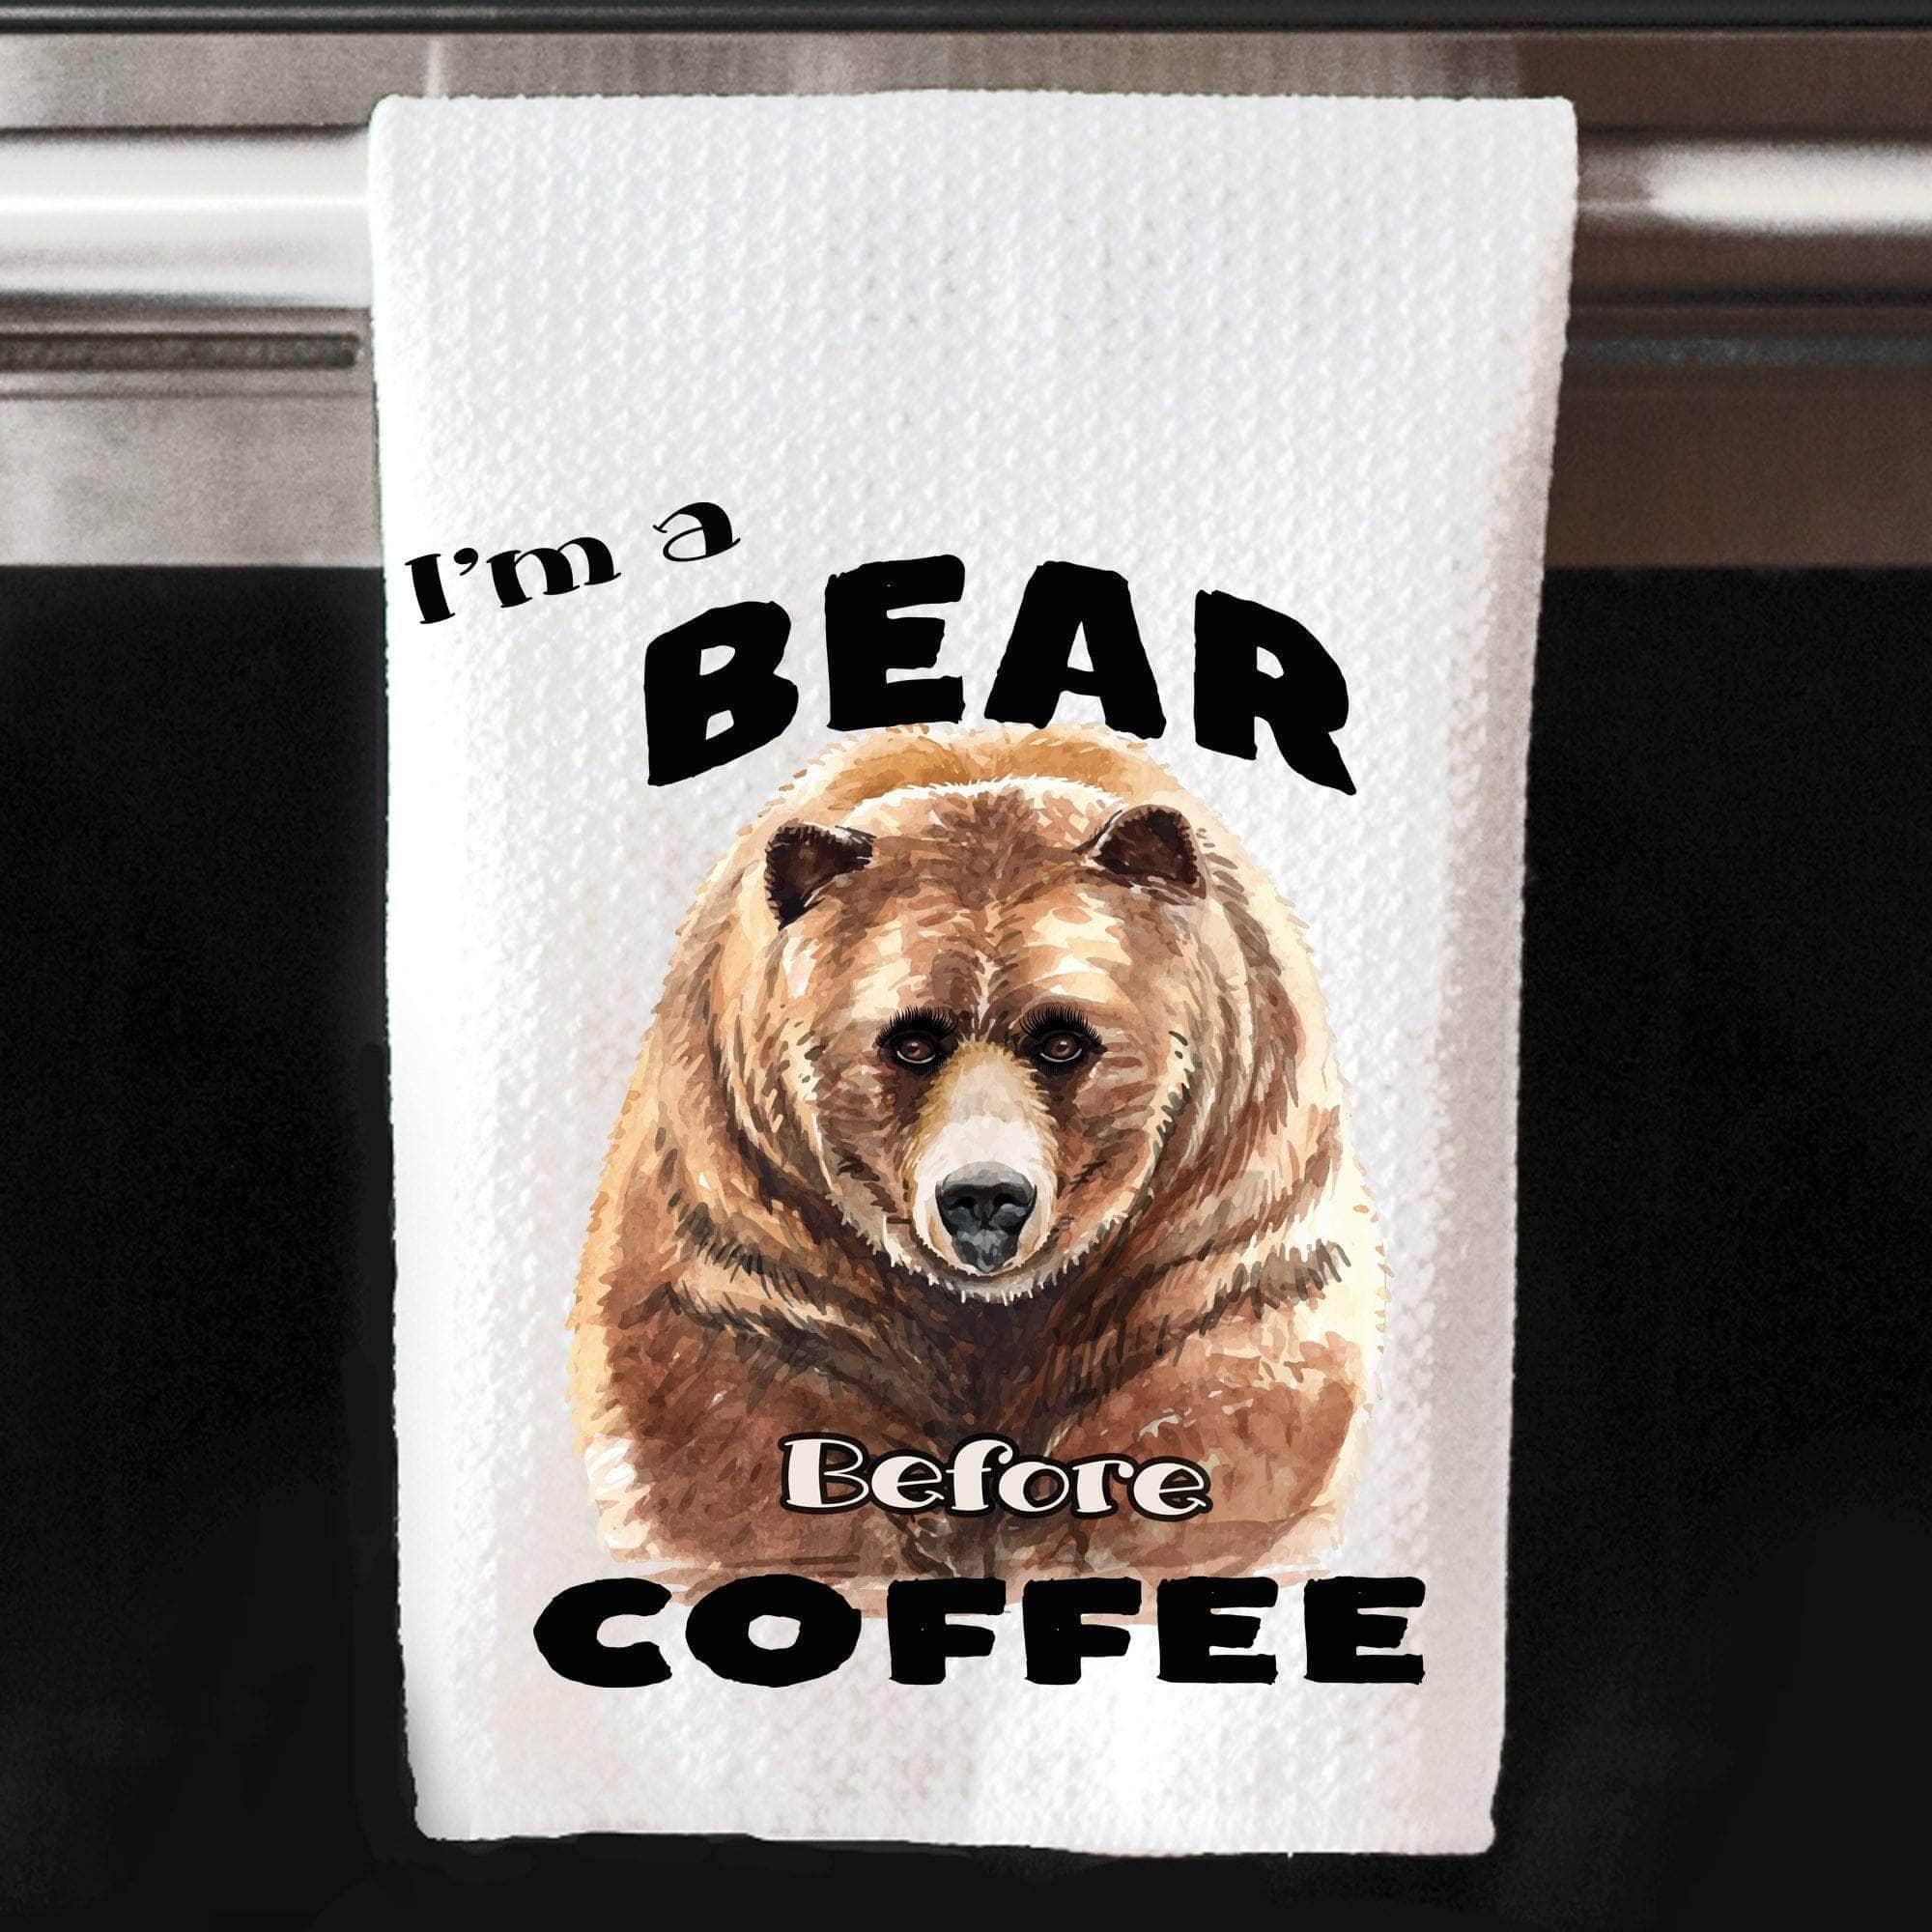 Grizzly Bear Kitchen Towel